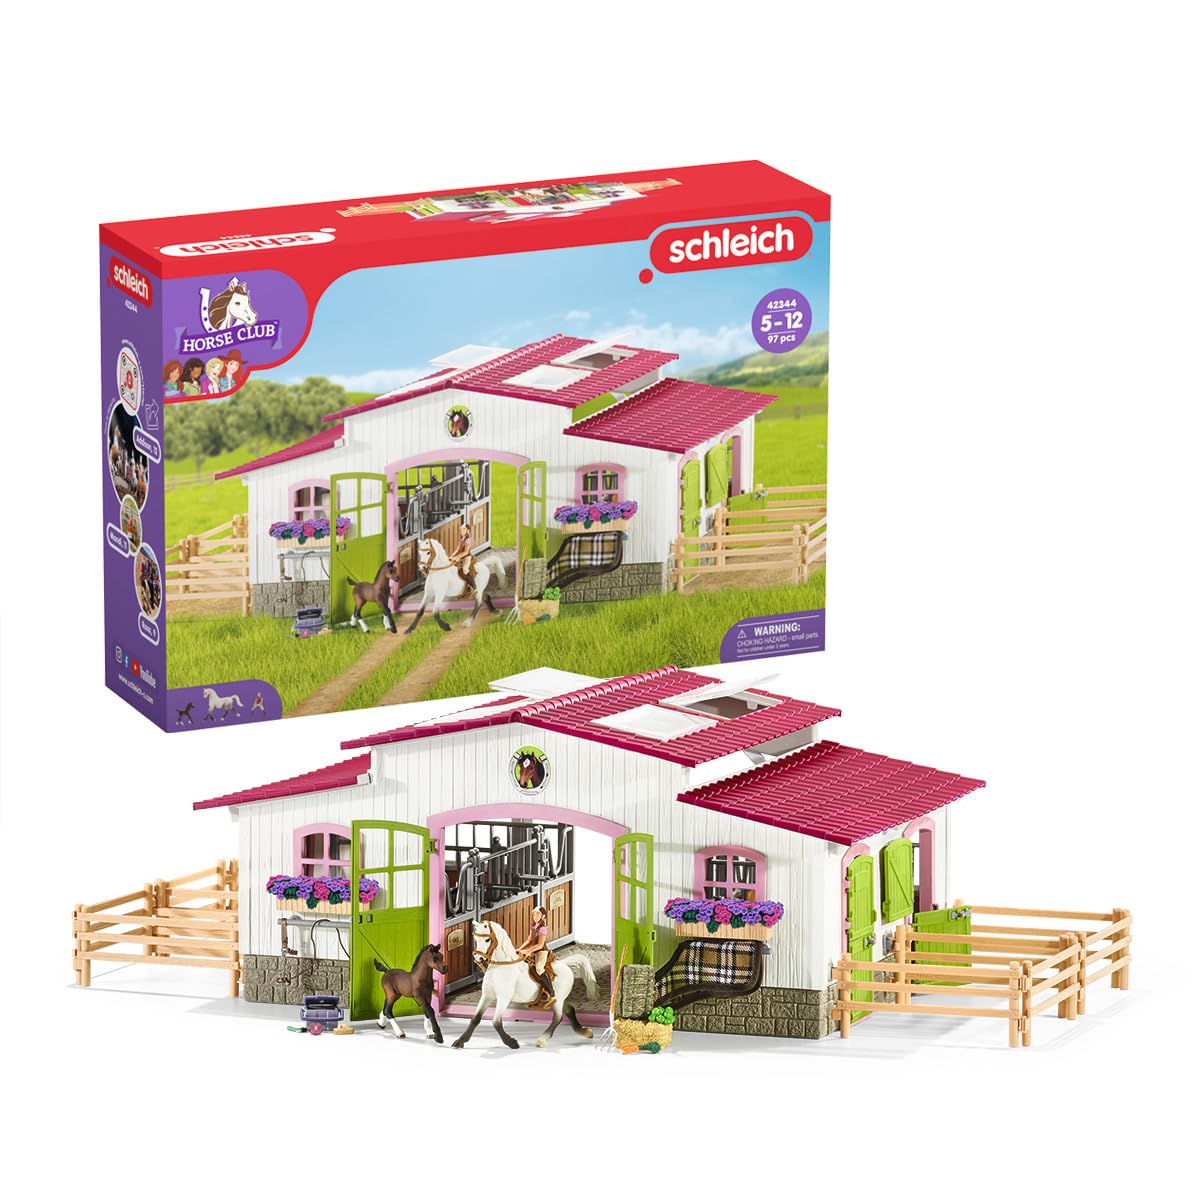 Schleich Horse Club Gifts for Girls and Boys, Riding Center with Rider and Horses, Horse Stable Set with Horse Toys, 97 pieces